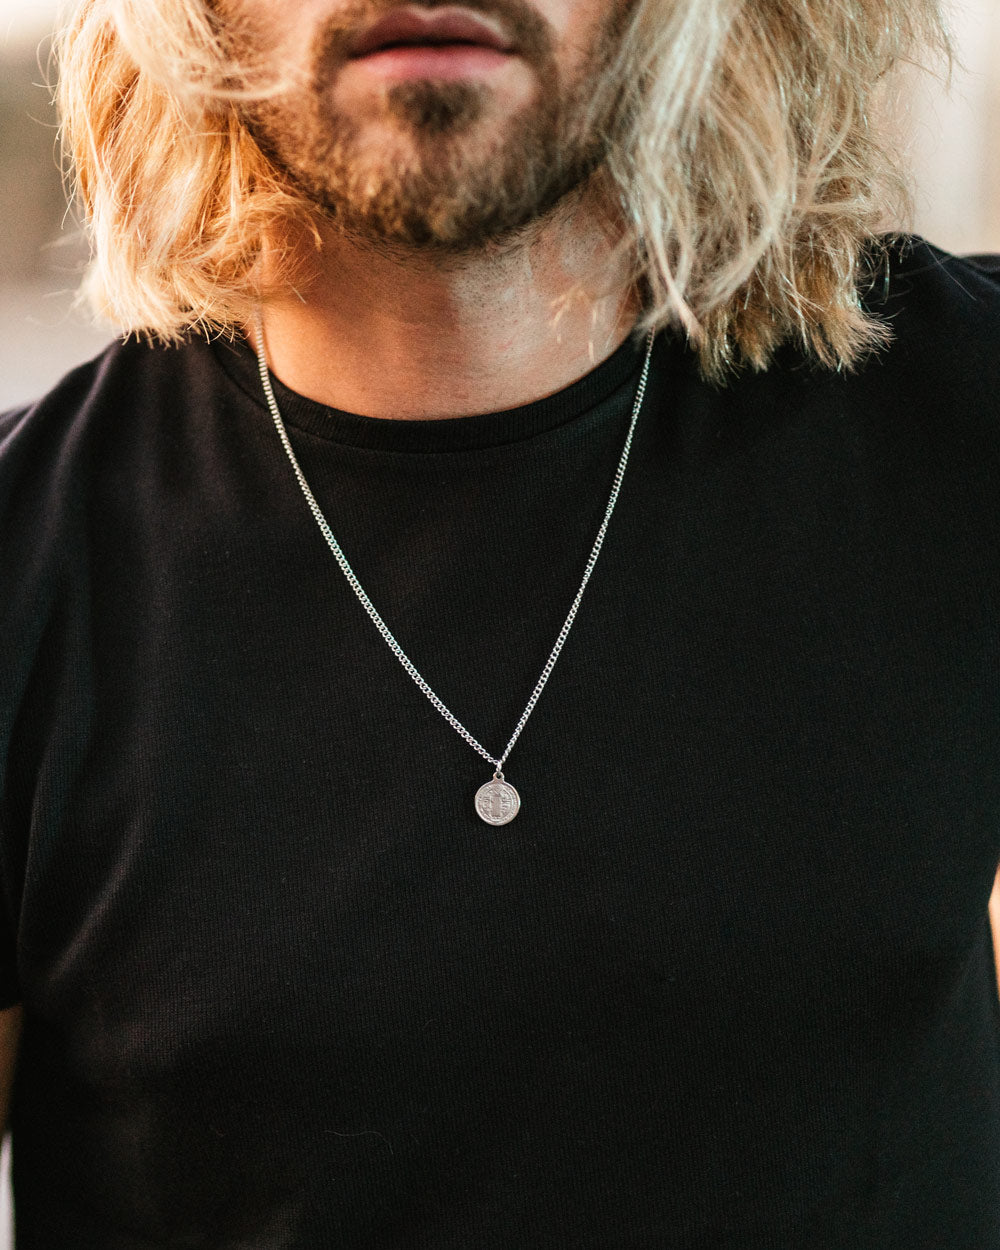 St. Benedict's Necklace - Stainless Steel Necklace with double engraved 'St. Benedict's' Pendant on the models neck - Online Unissex Jewelry - Dicci